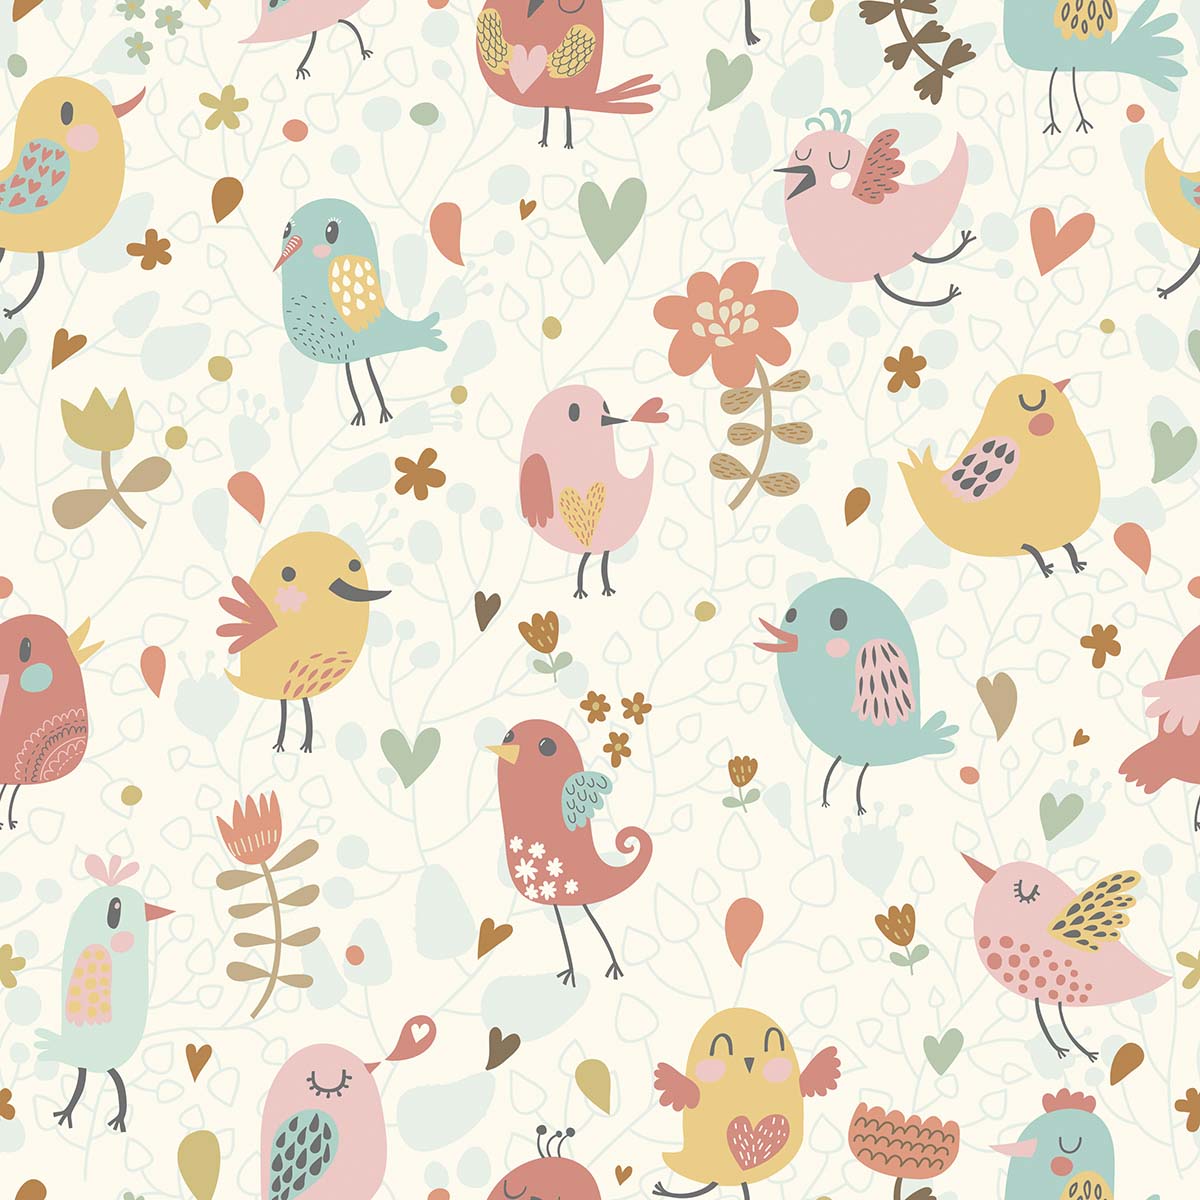 A pattern of colorful birds and flowers